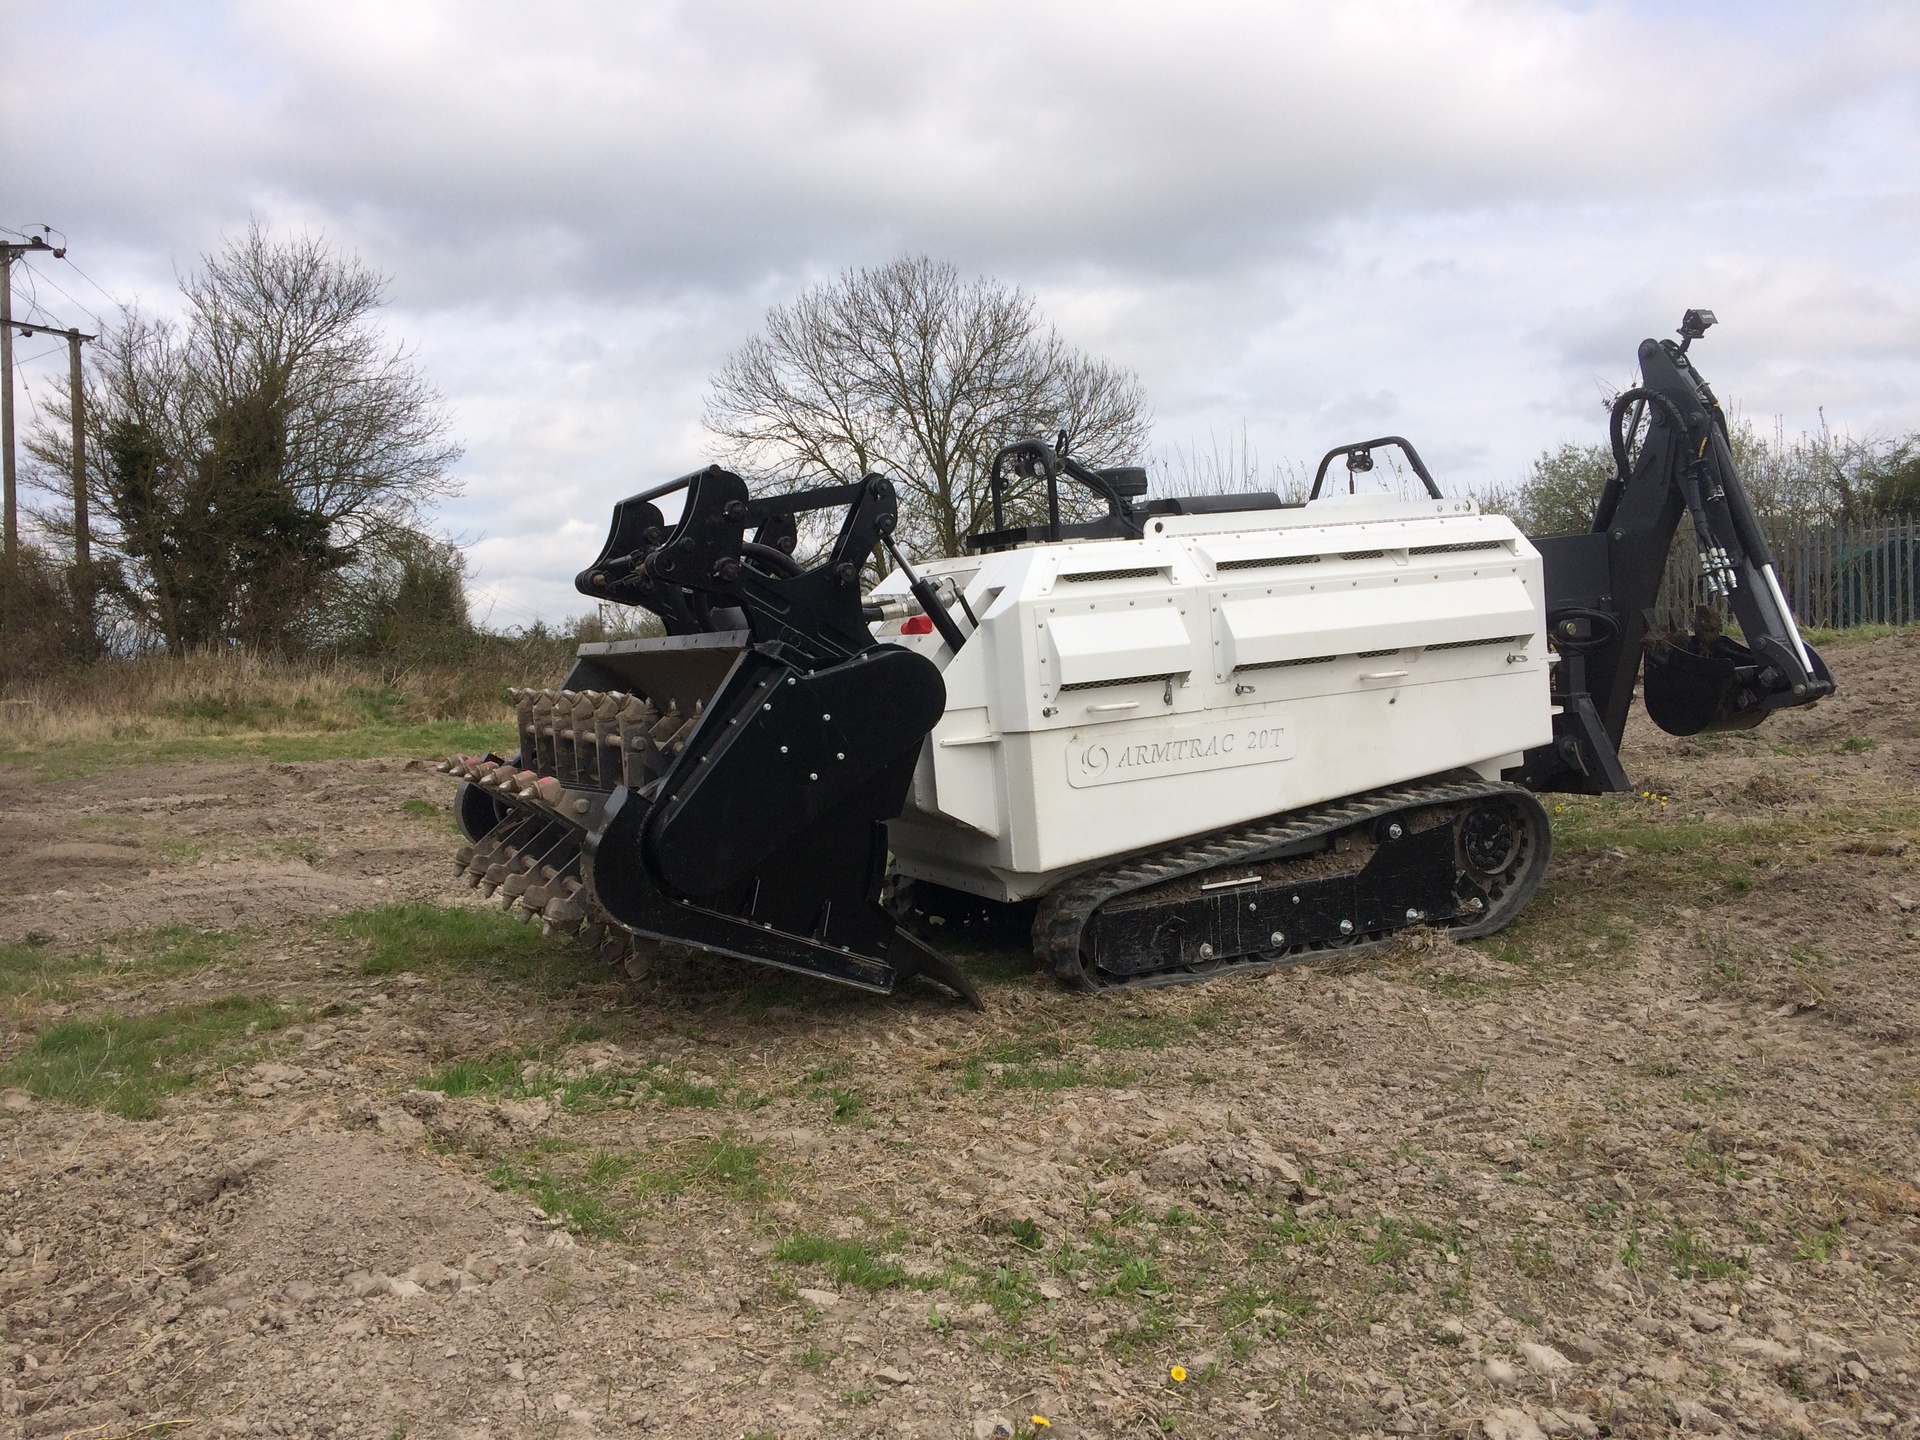 Armtrac 20T Mk2 C-IED Demining Robot